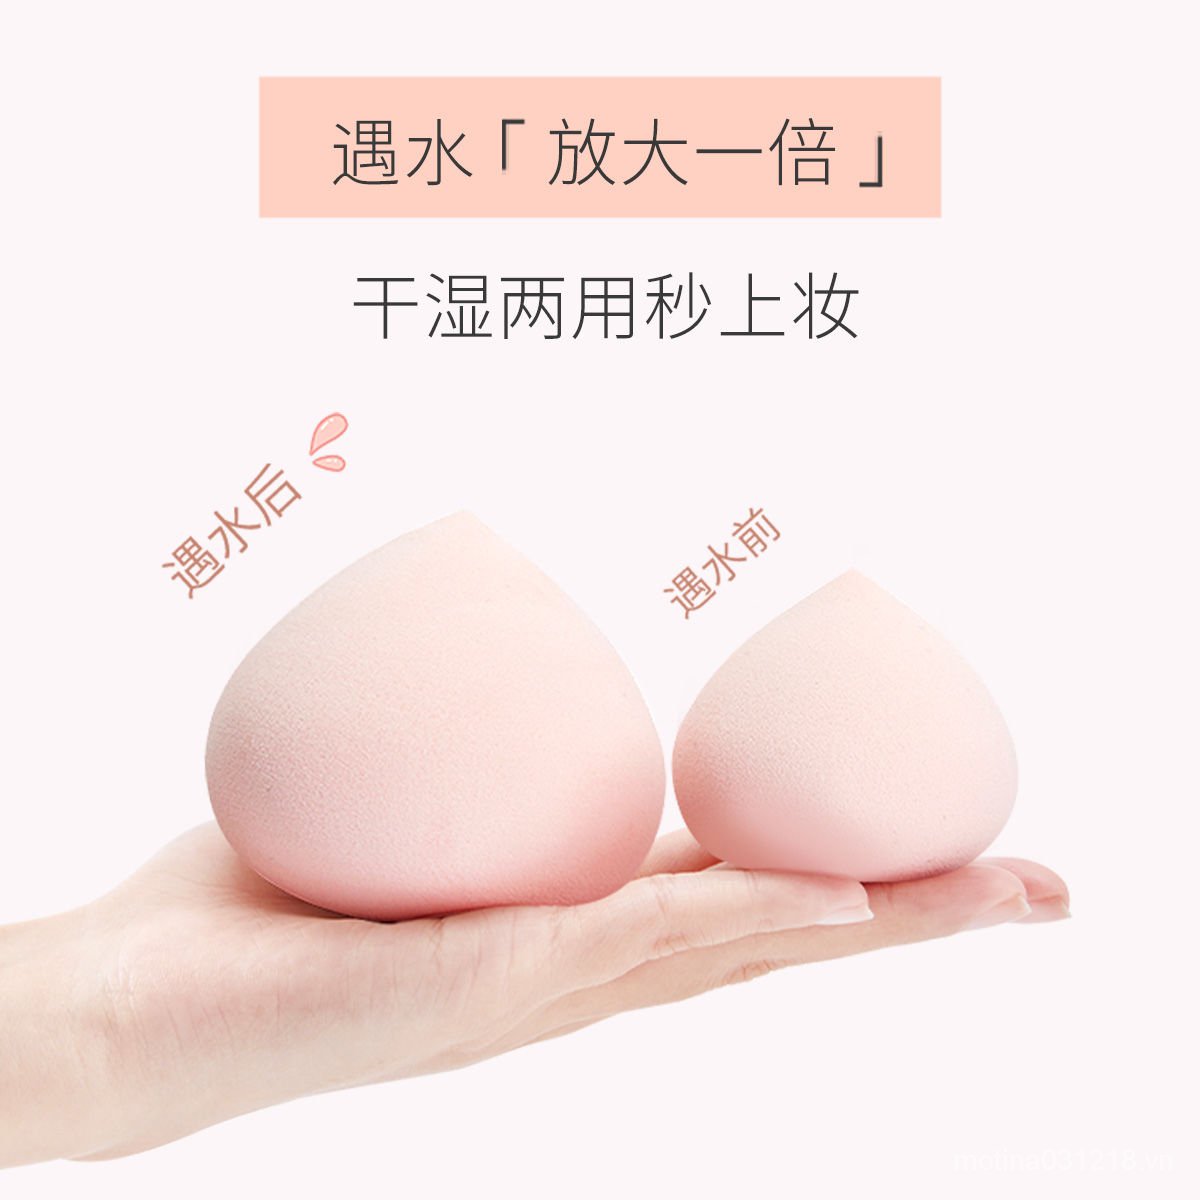 【NOVO】Blender Don't Eat Powder Air Cushion Puff Sponge Egg Cotton Pad Makeup Egg Cosmetic Students Wet and Dry